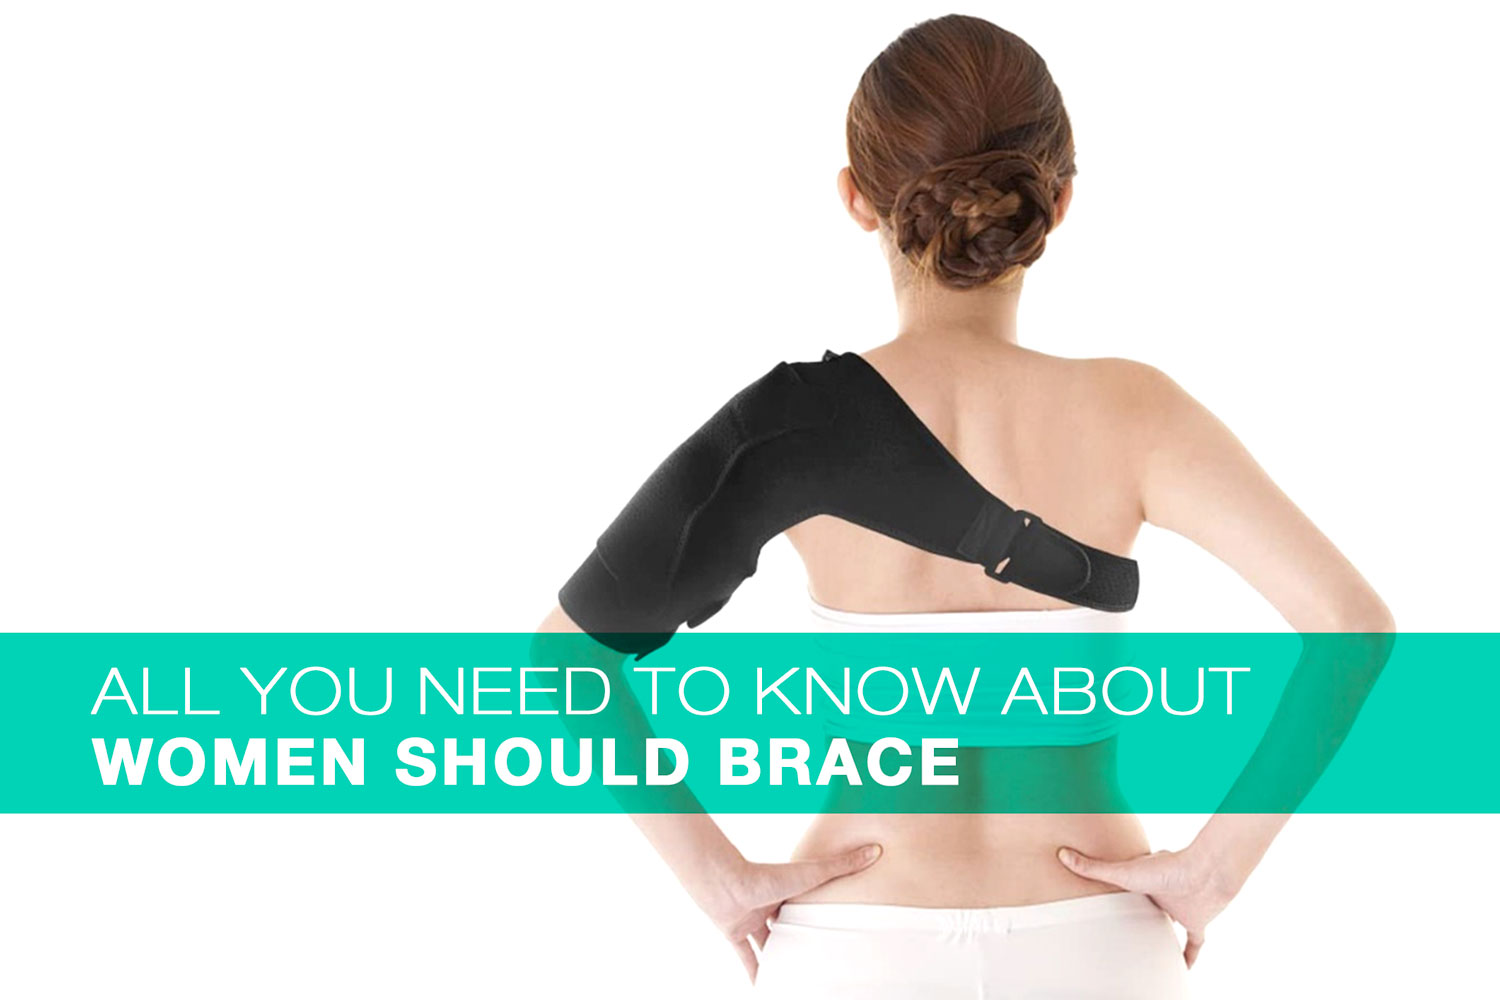 All-You-Need-To-Know-About-Women-Should-Brace